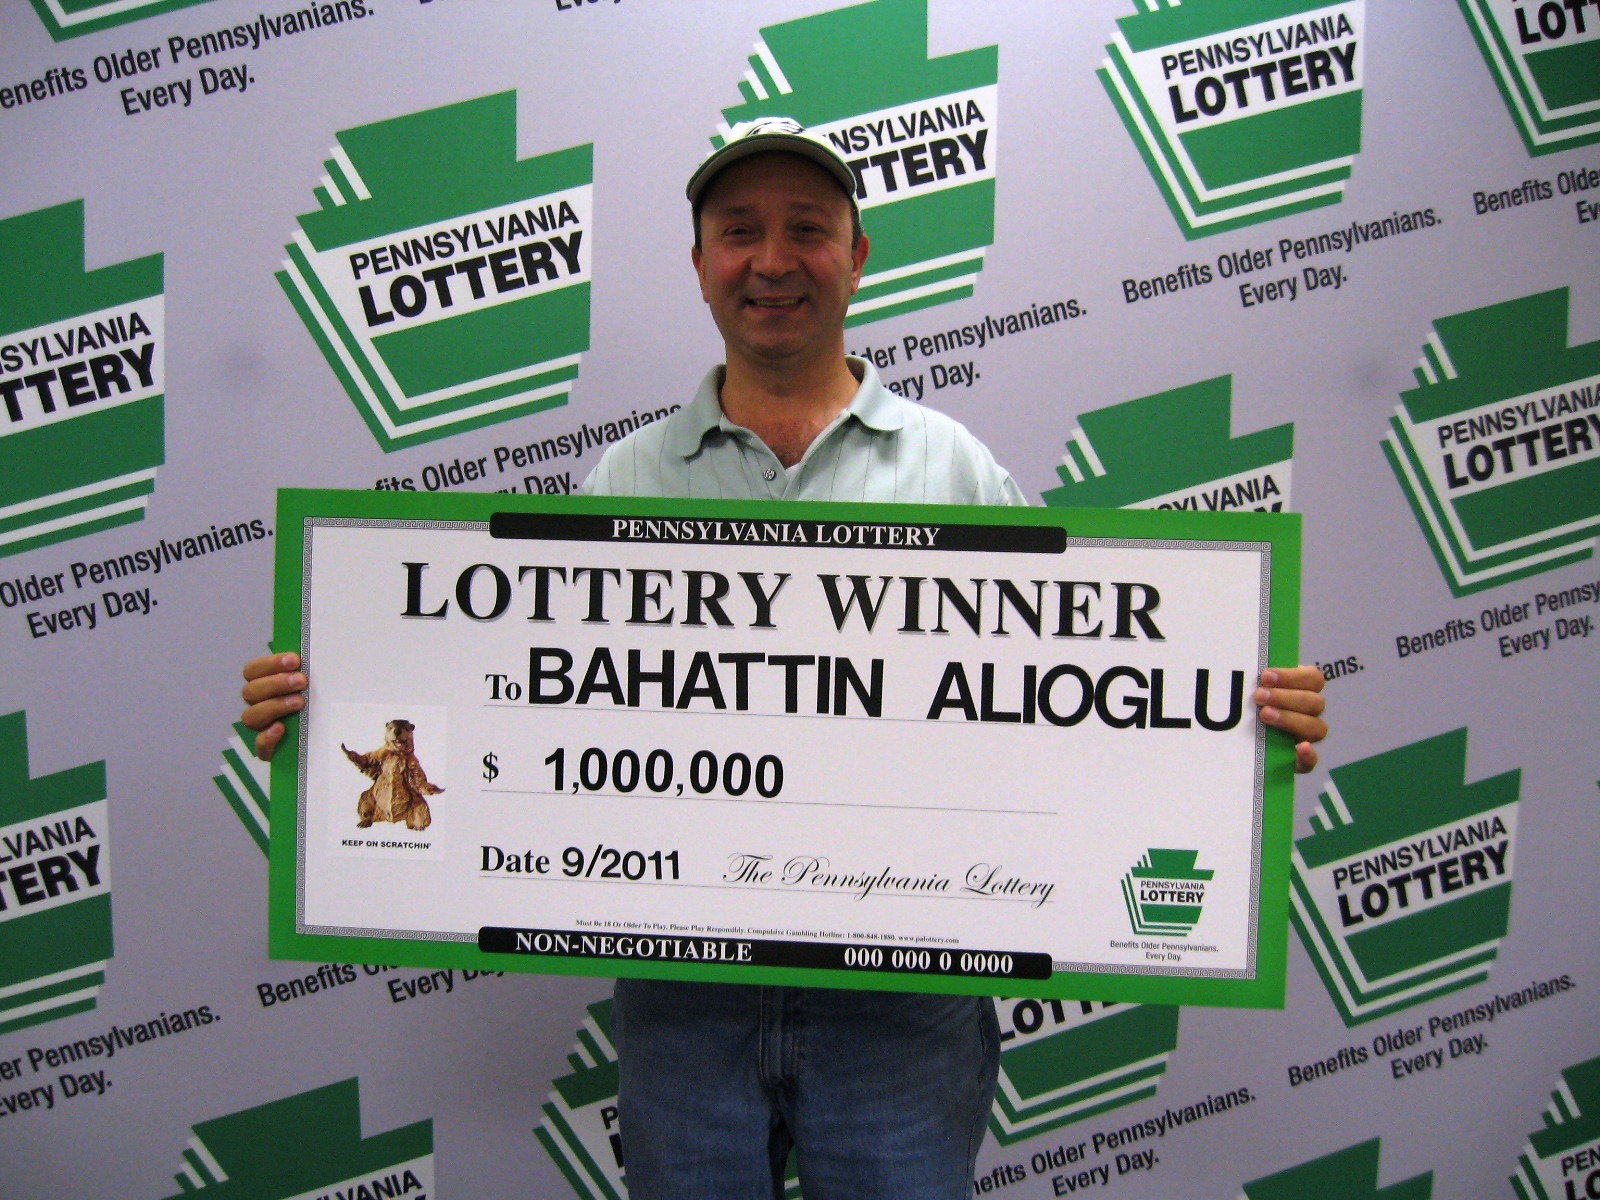 Pennsylvania Lottery - PA Lottery Winners Stories and Videos1600 x 1200